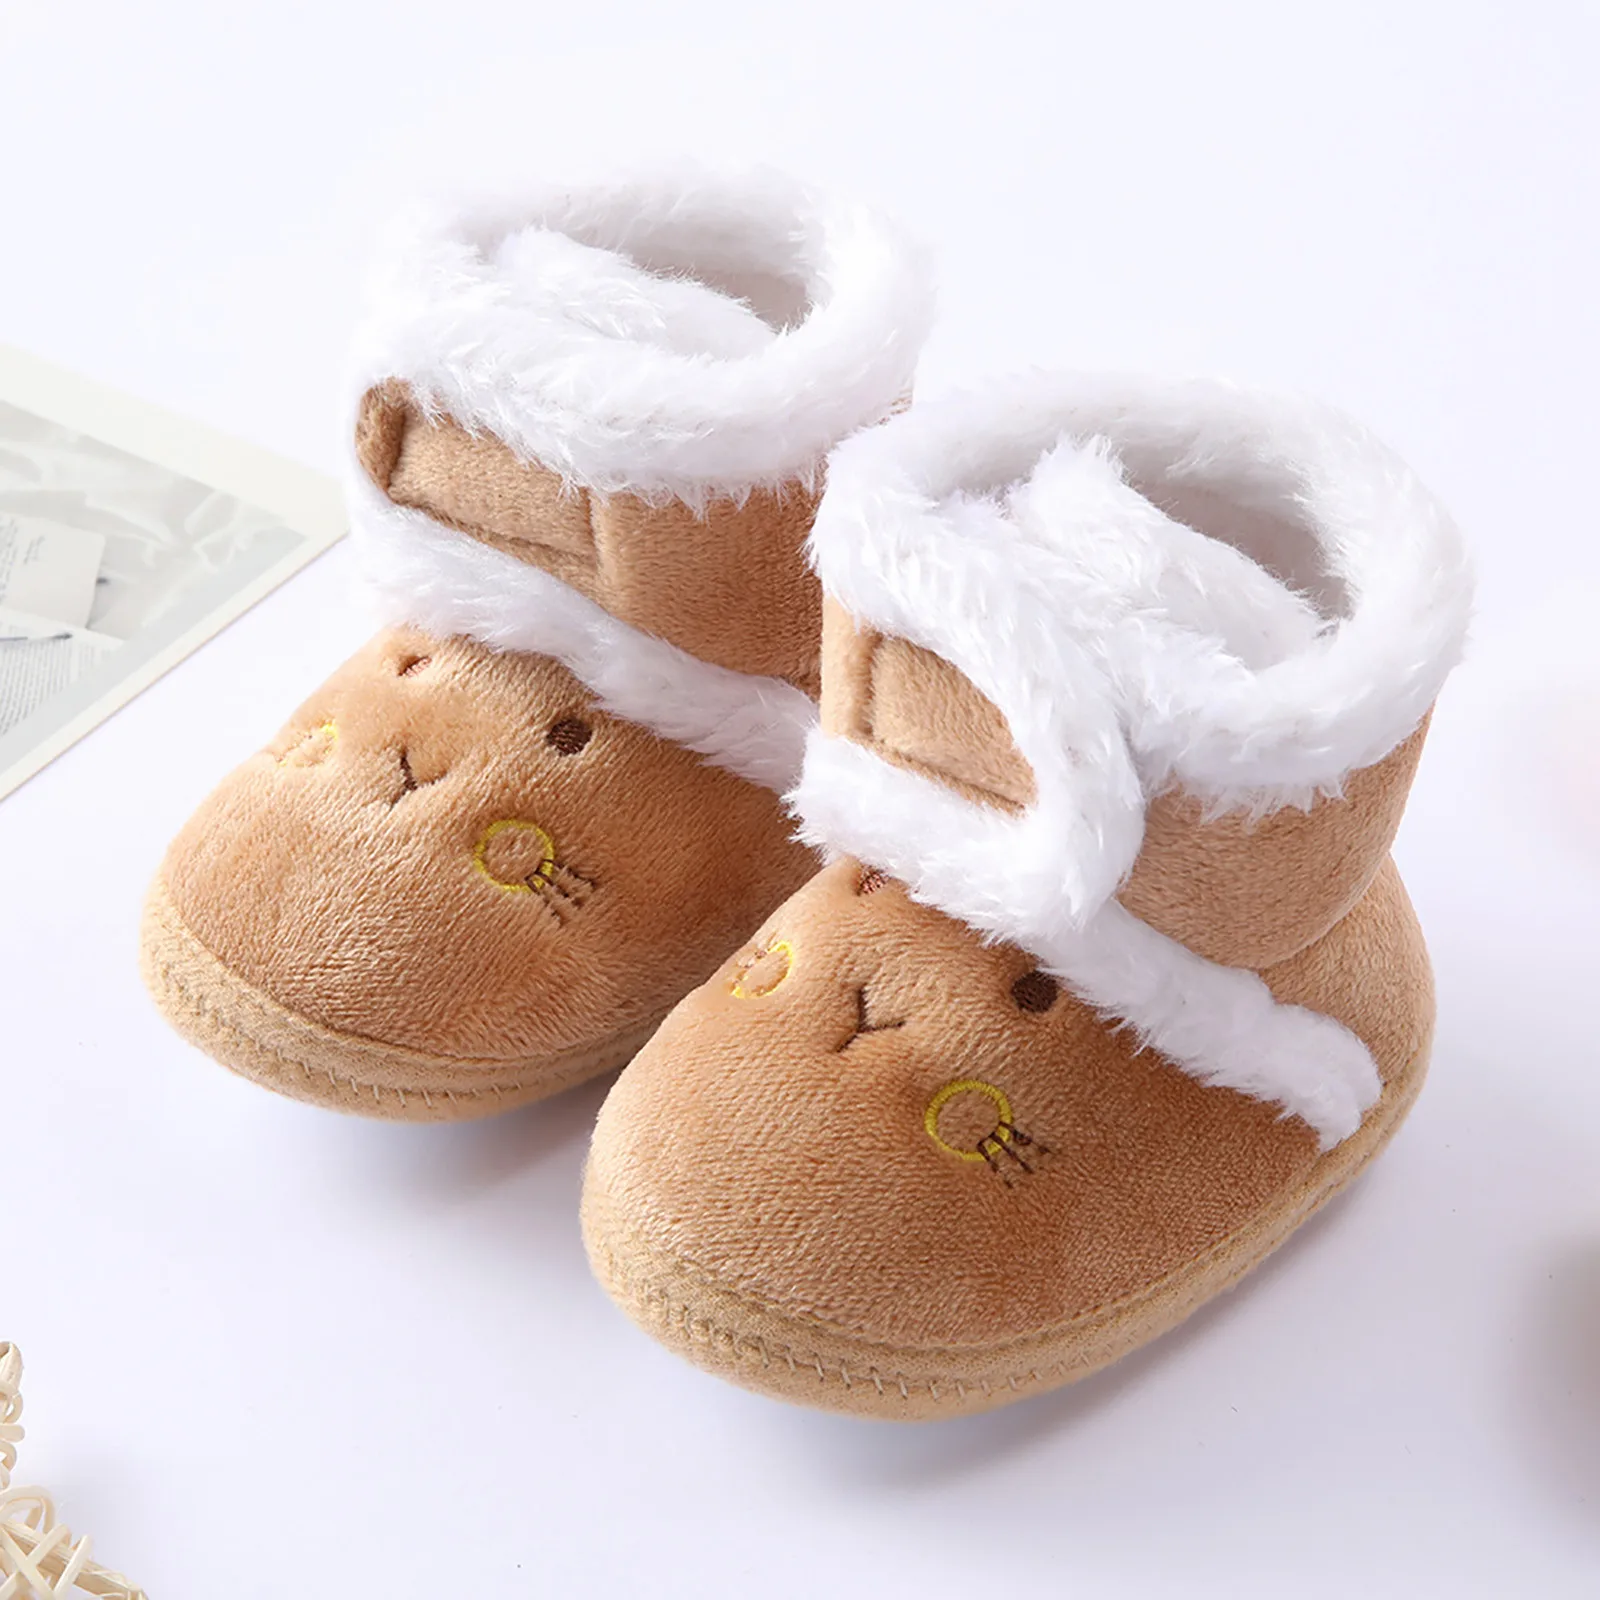 Tcesud Unisex Baby Boys Girls Cozy Fleece Winter Warm Snow Boots Knit Soft Fur Newborn Infant First Walkers Slippers Shoes 